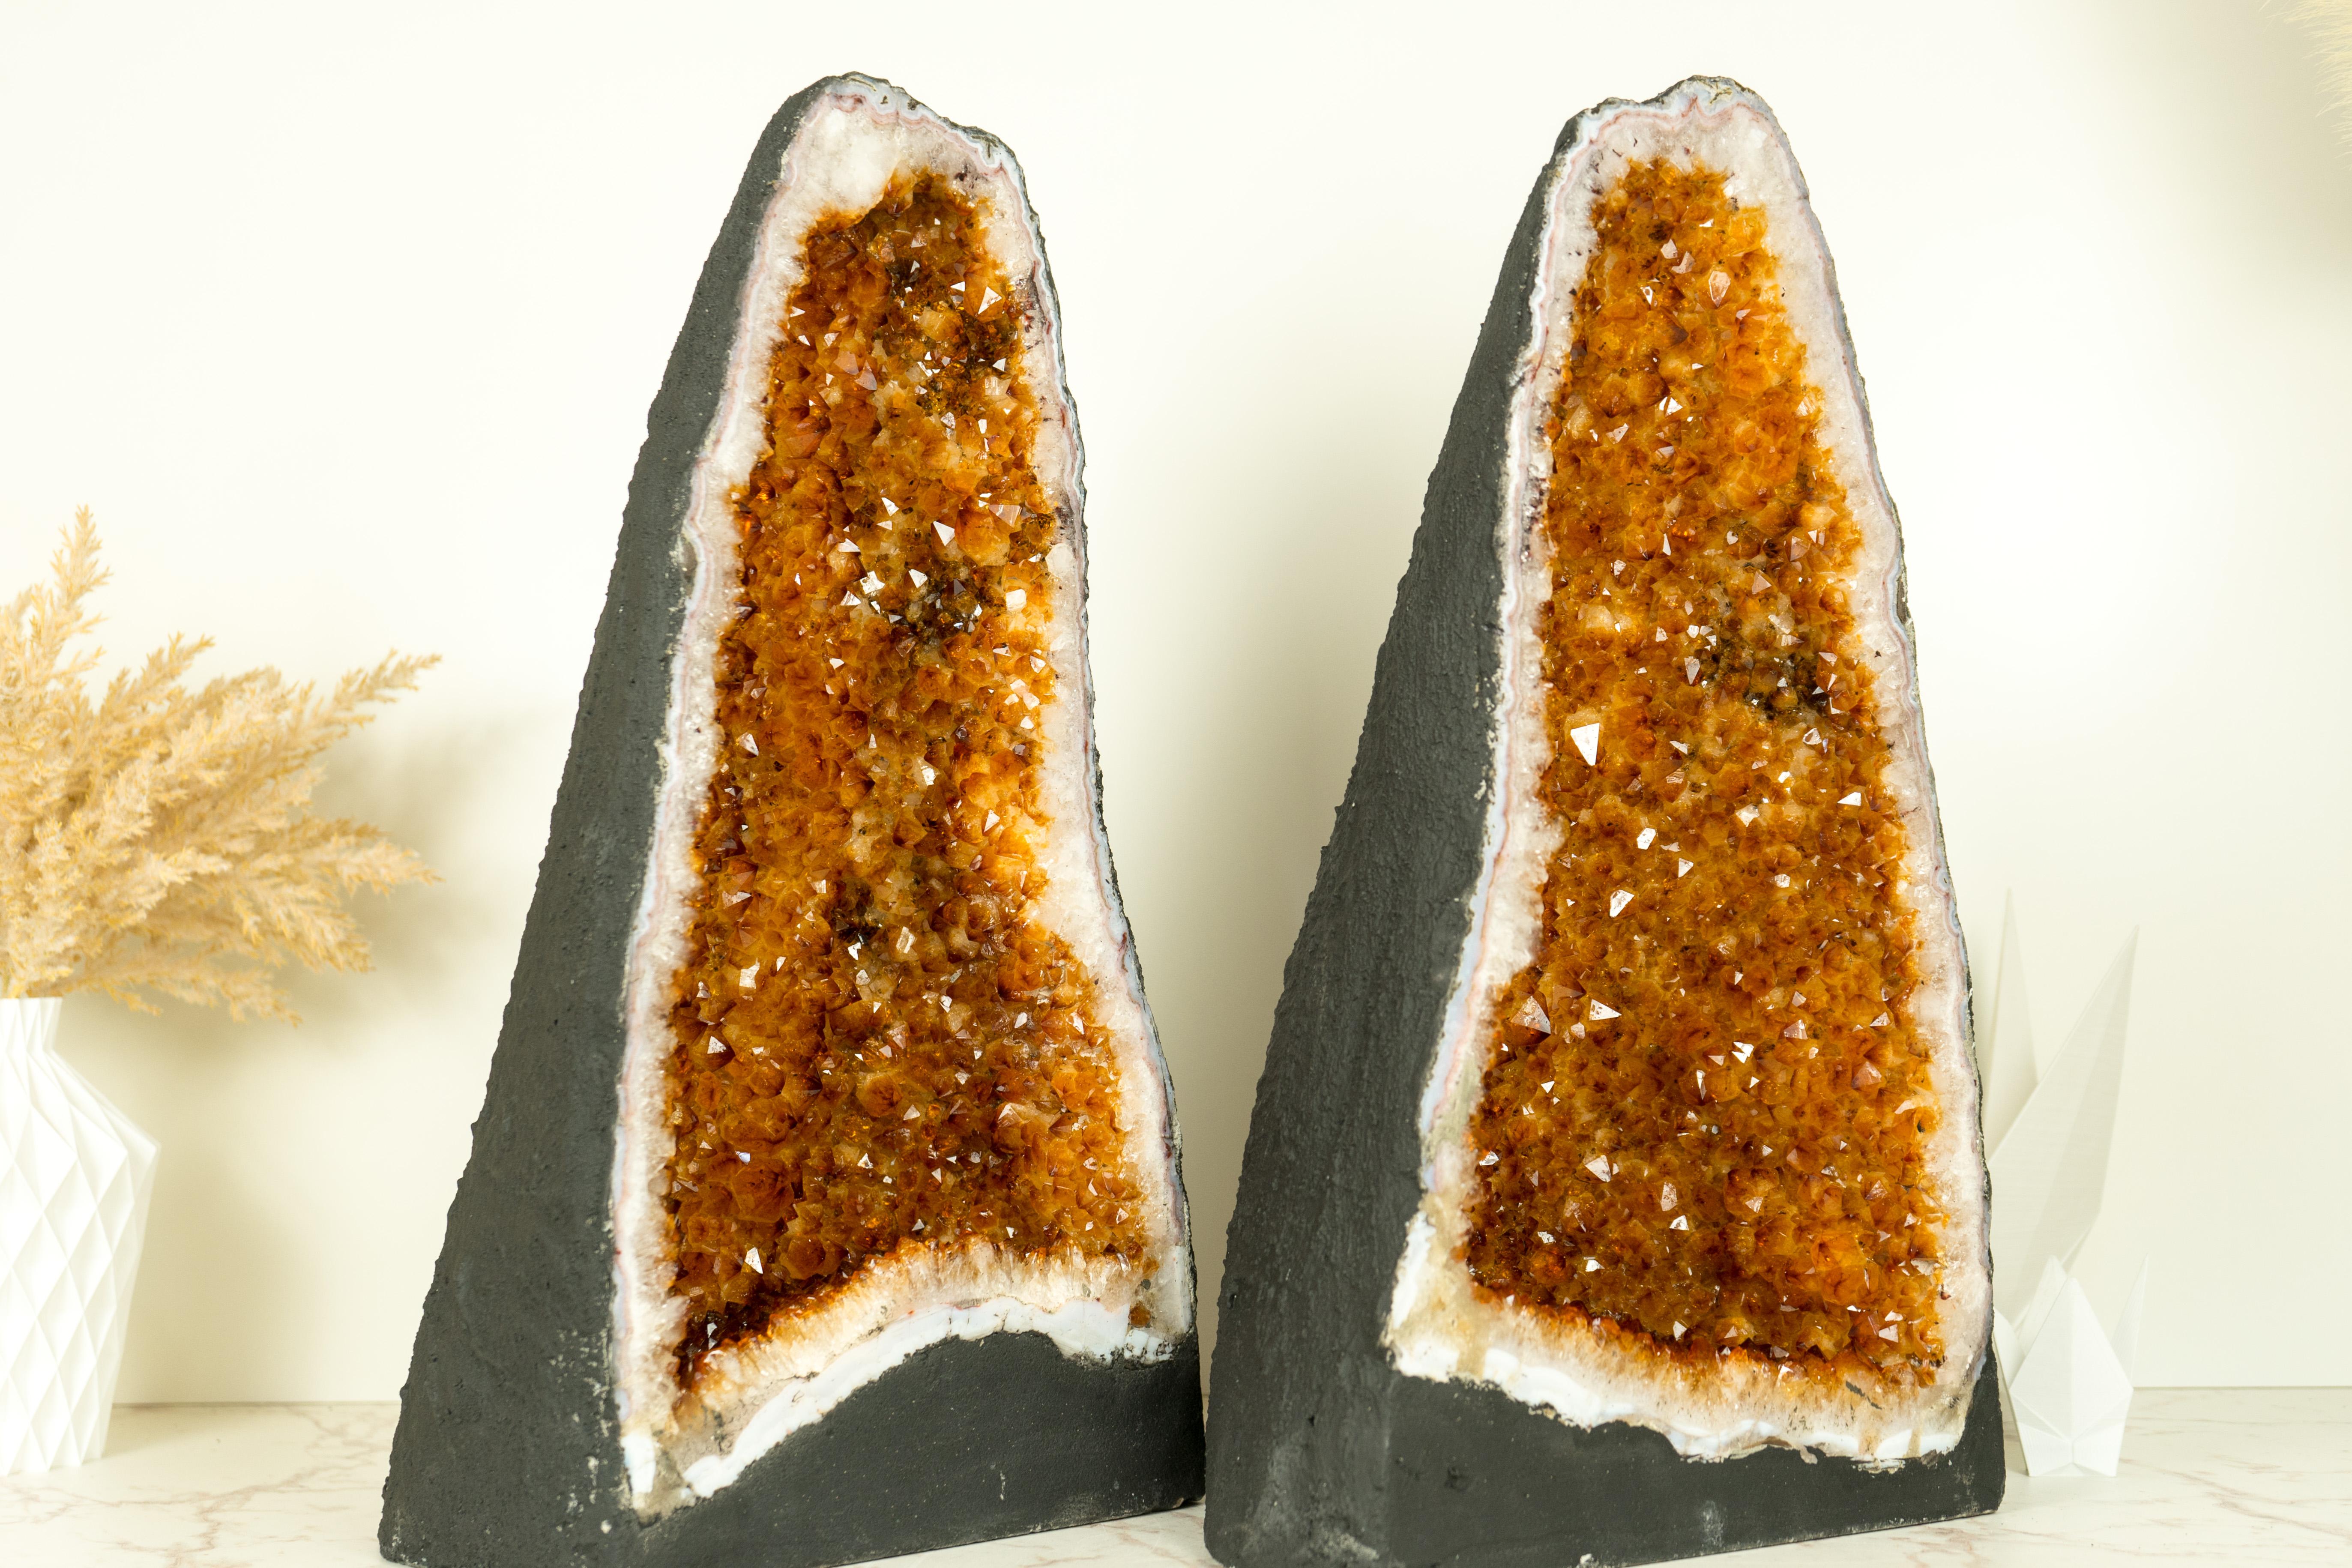 Pair of Citrine Geode Cathedrals with Sparkling AAA-Grade, Rich Orange Druzy 2